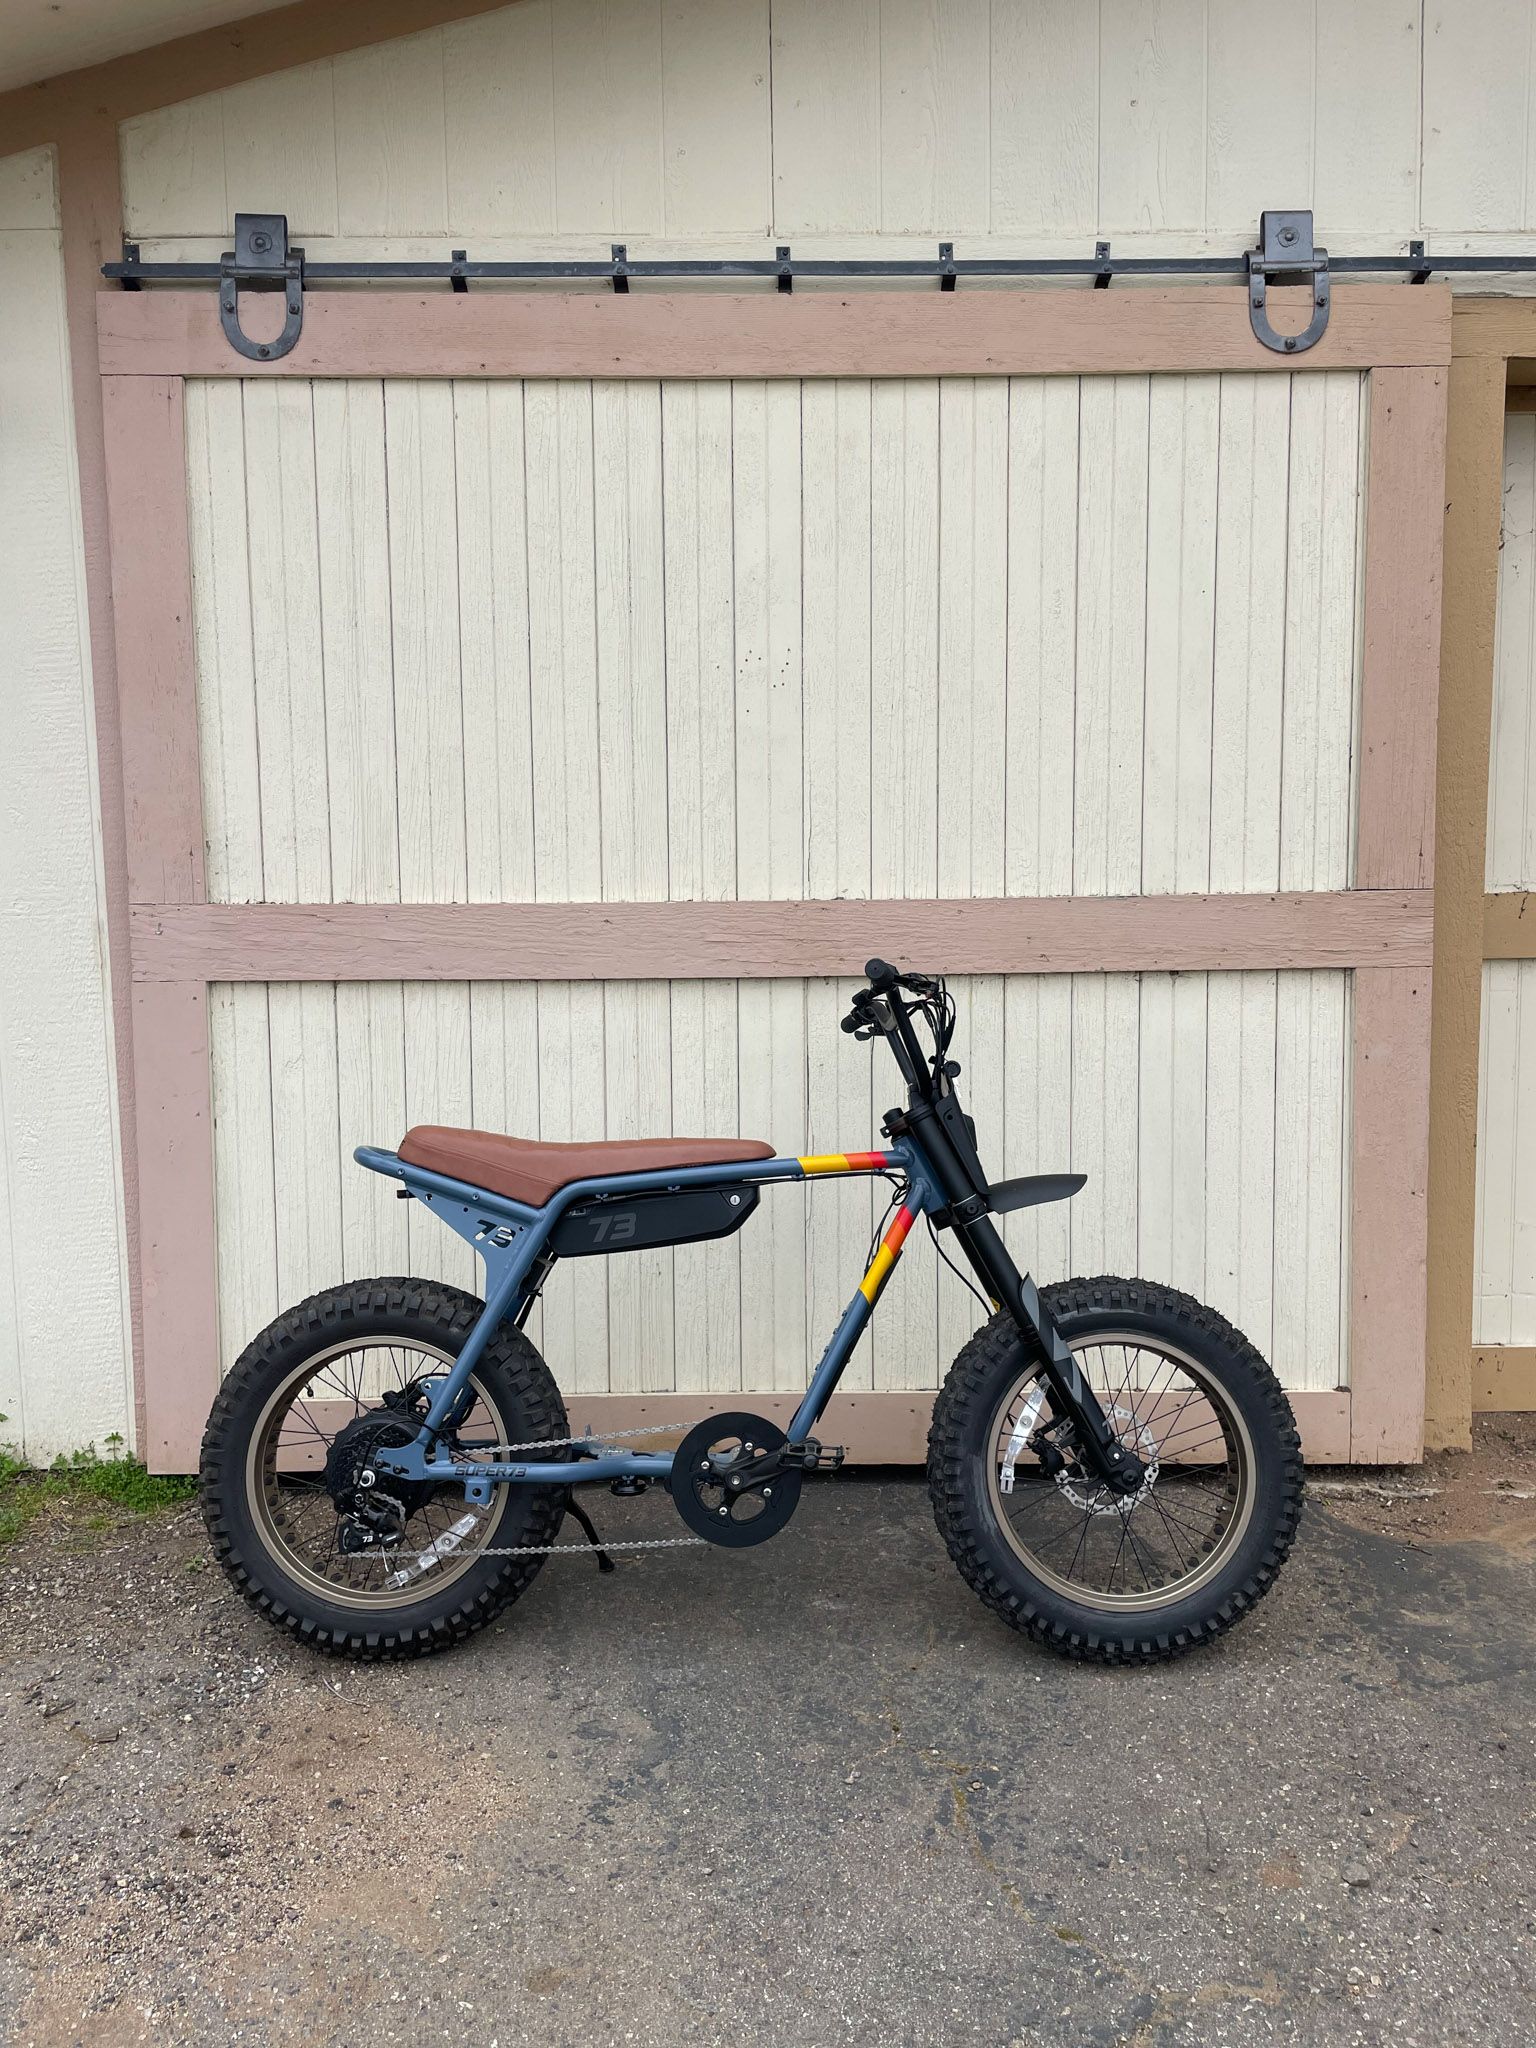 Super 73 Adventure Series Review A Bike for Manicured Adventures